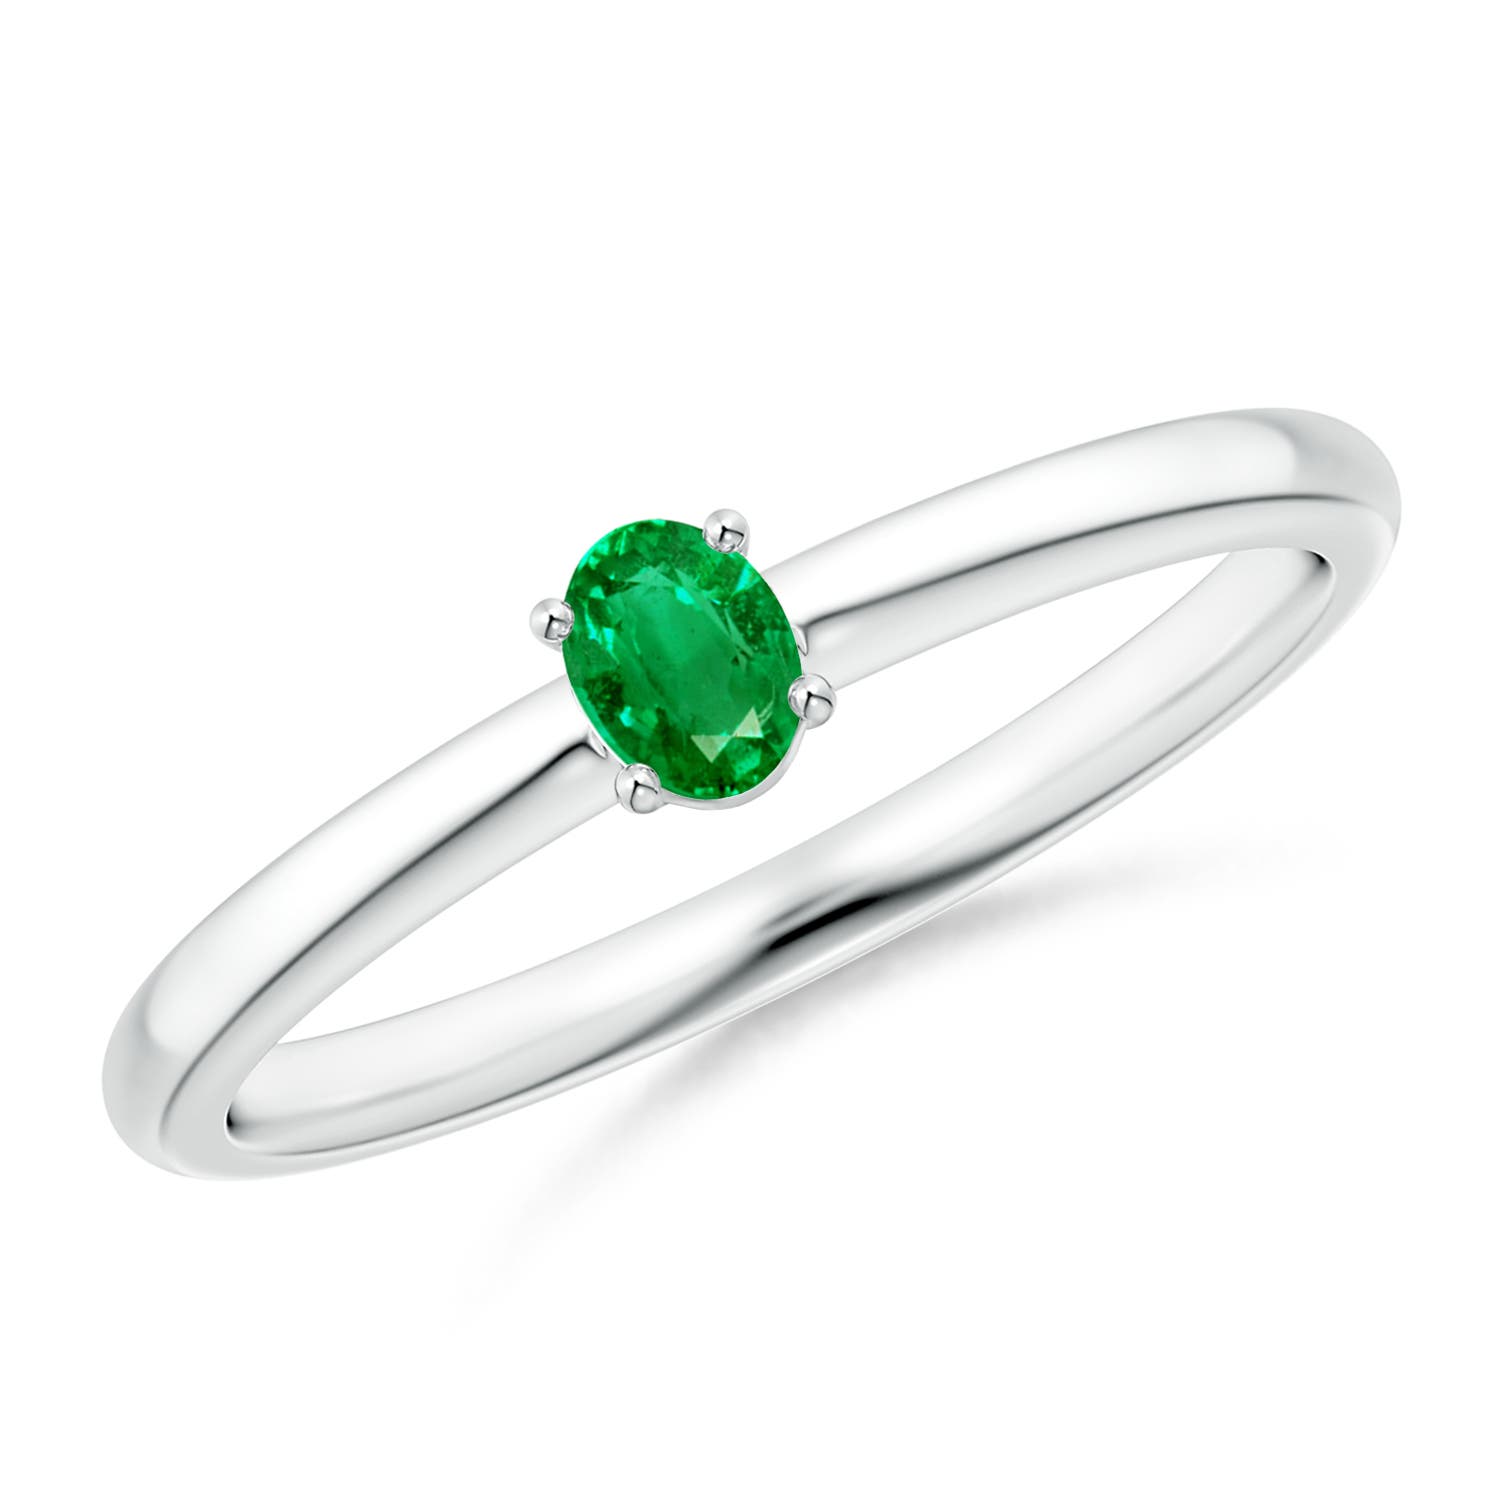 AAA - Emerald / 0.12 CT / 14 KT White Gold